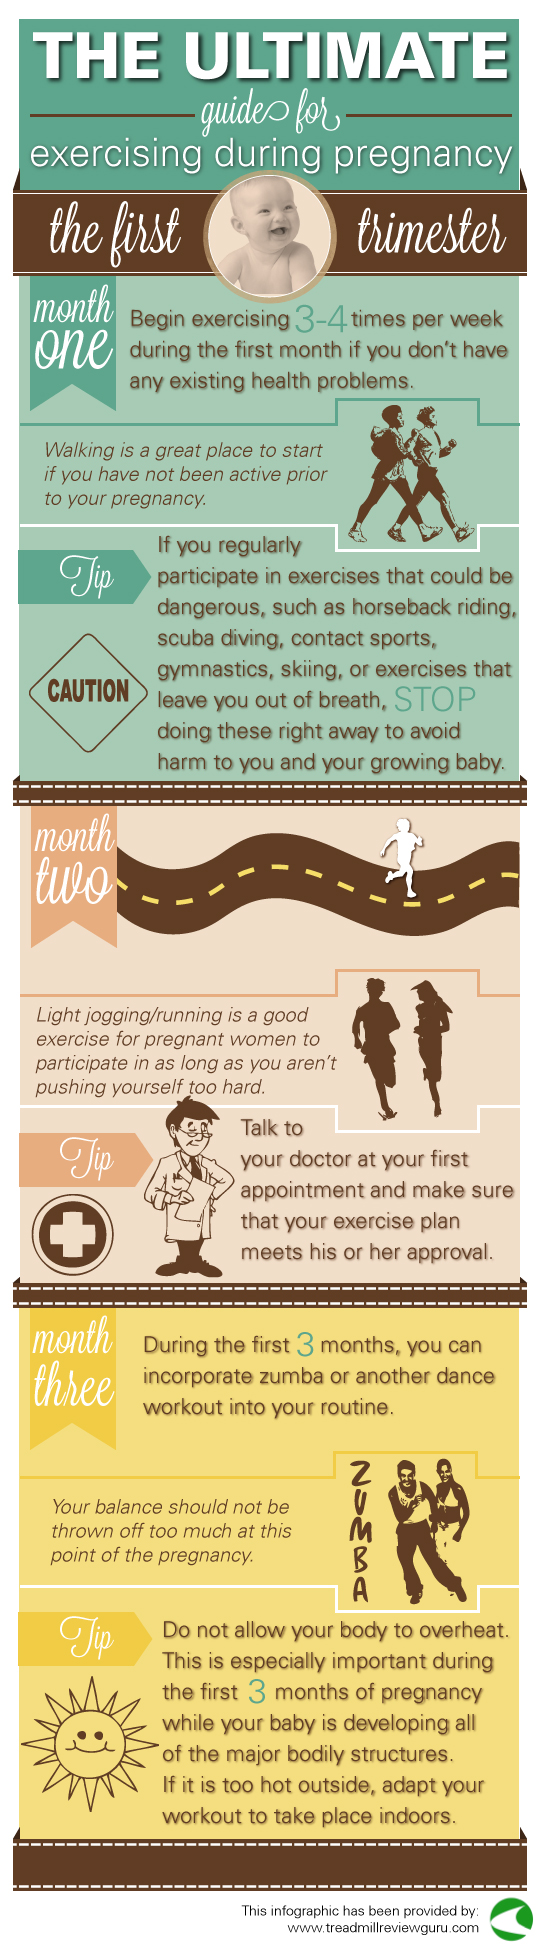 The Ultimate Guide for Exercising During Pregnancy (1st Trimester)